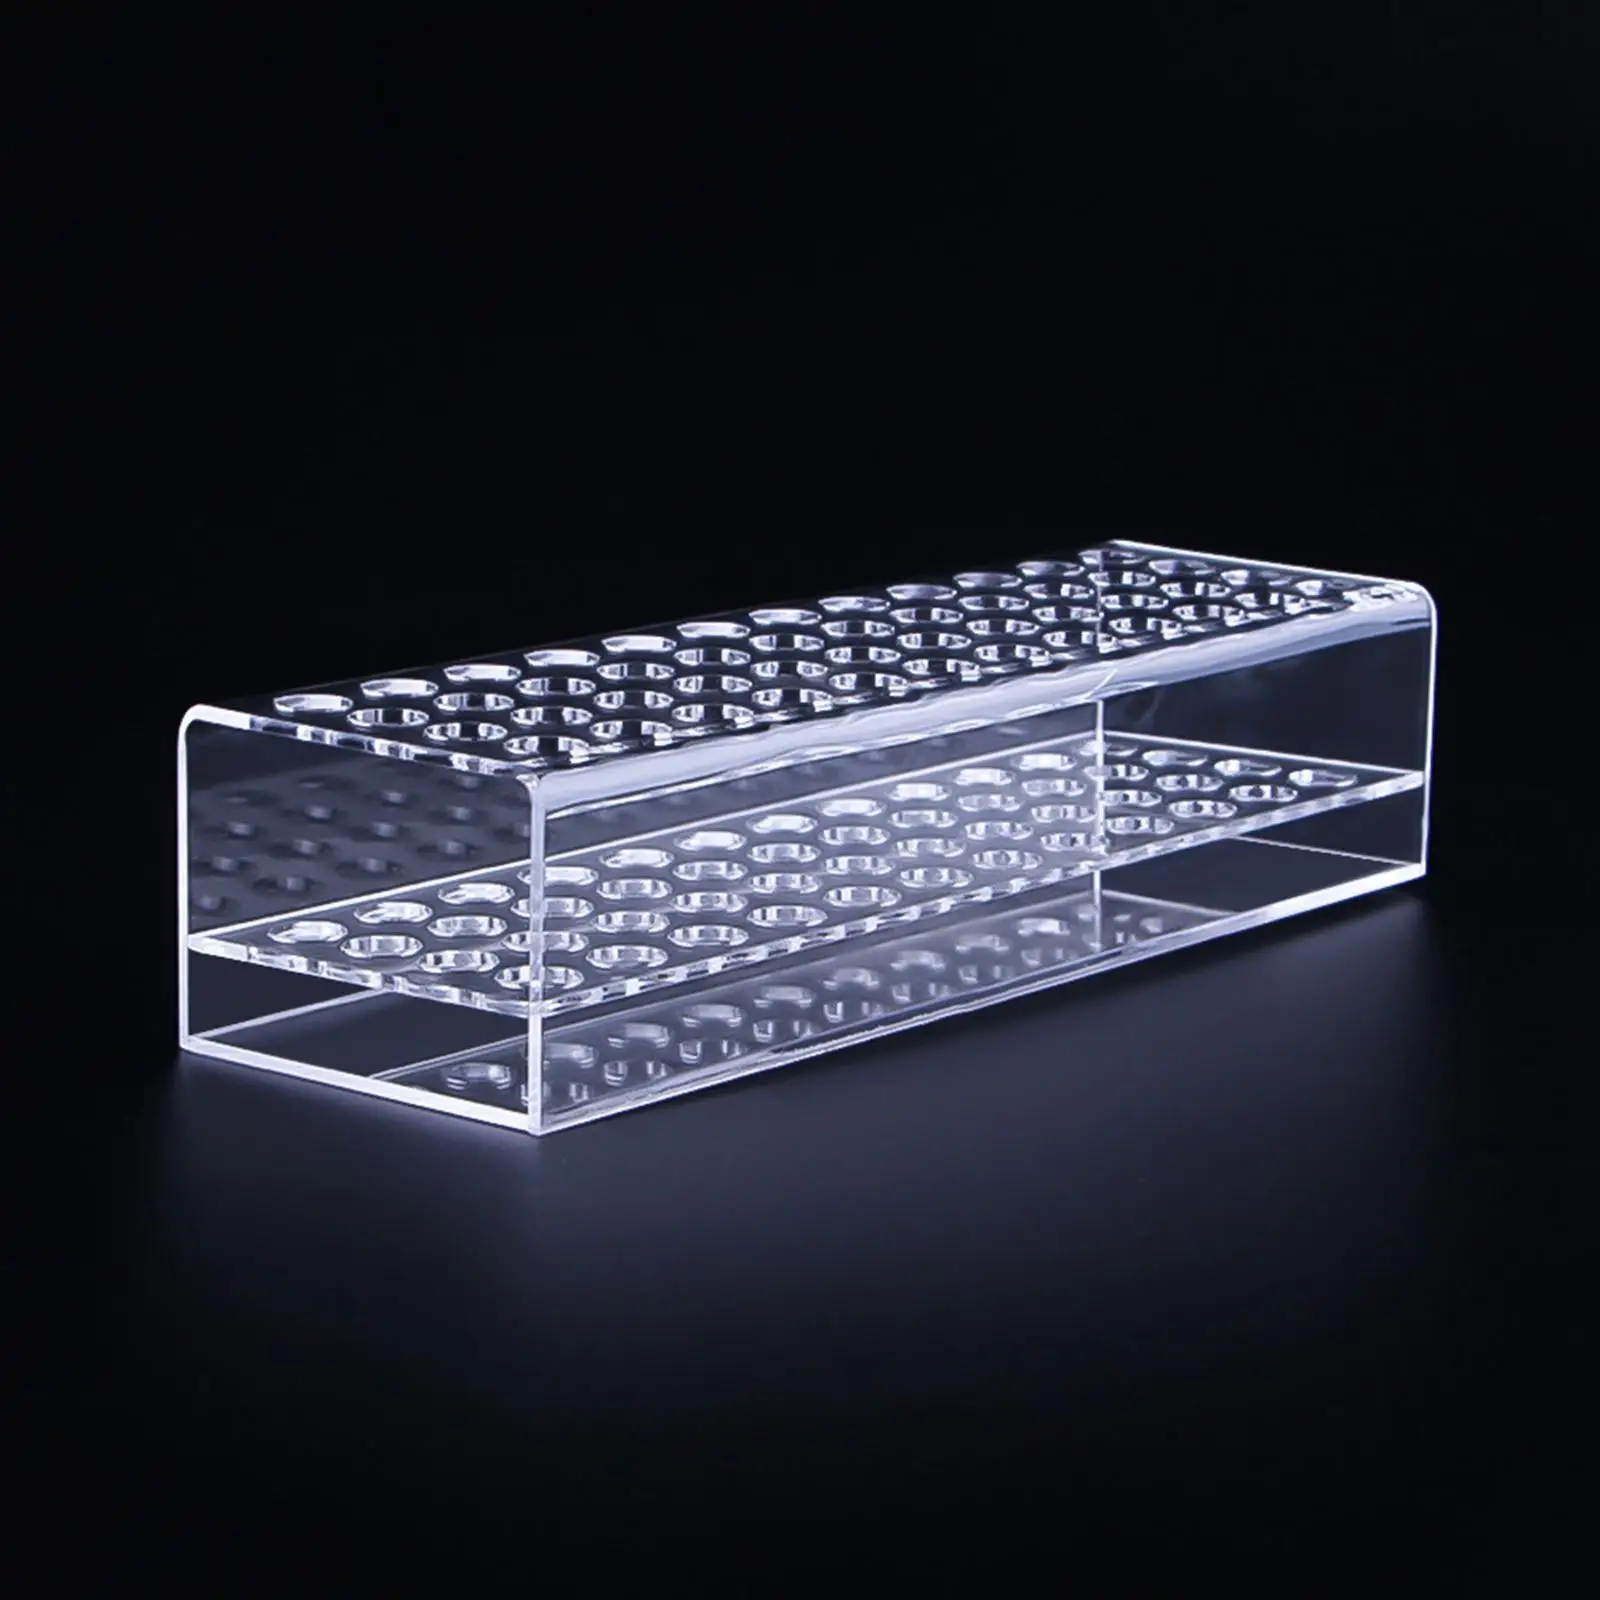 Acrylic Pen Holder Storage Box Desk Organizer 40 Hole Clear Pencil Holder for Cosmetic Brushes Store Use Home Art Studios Office